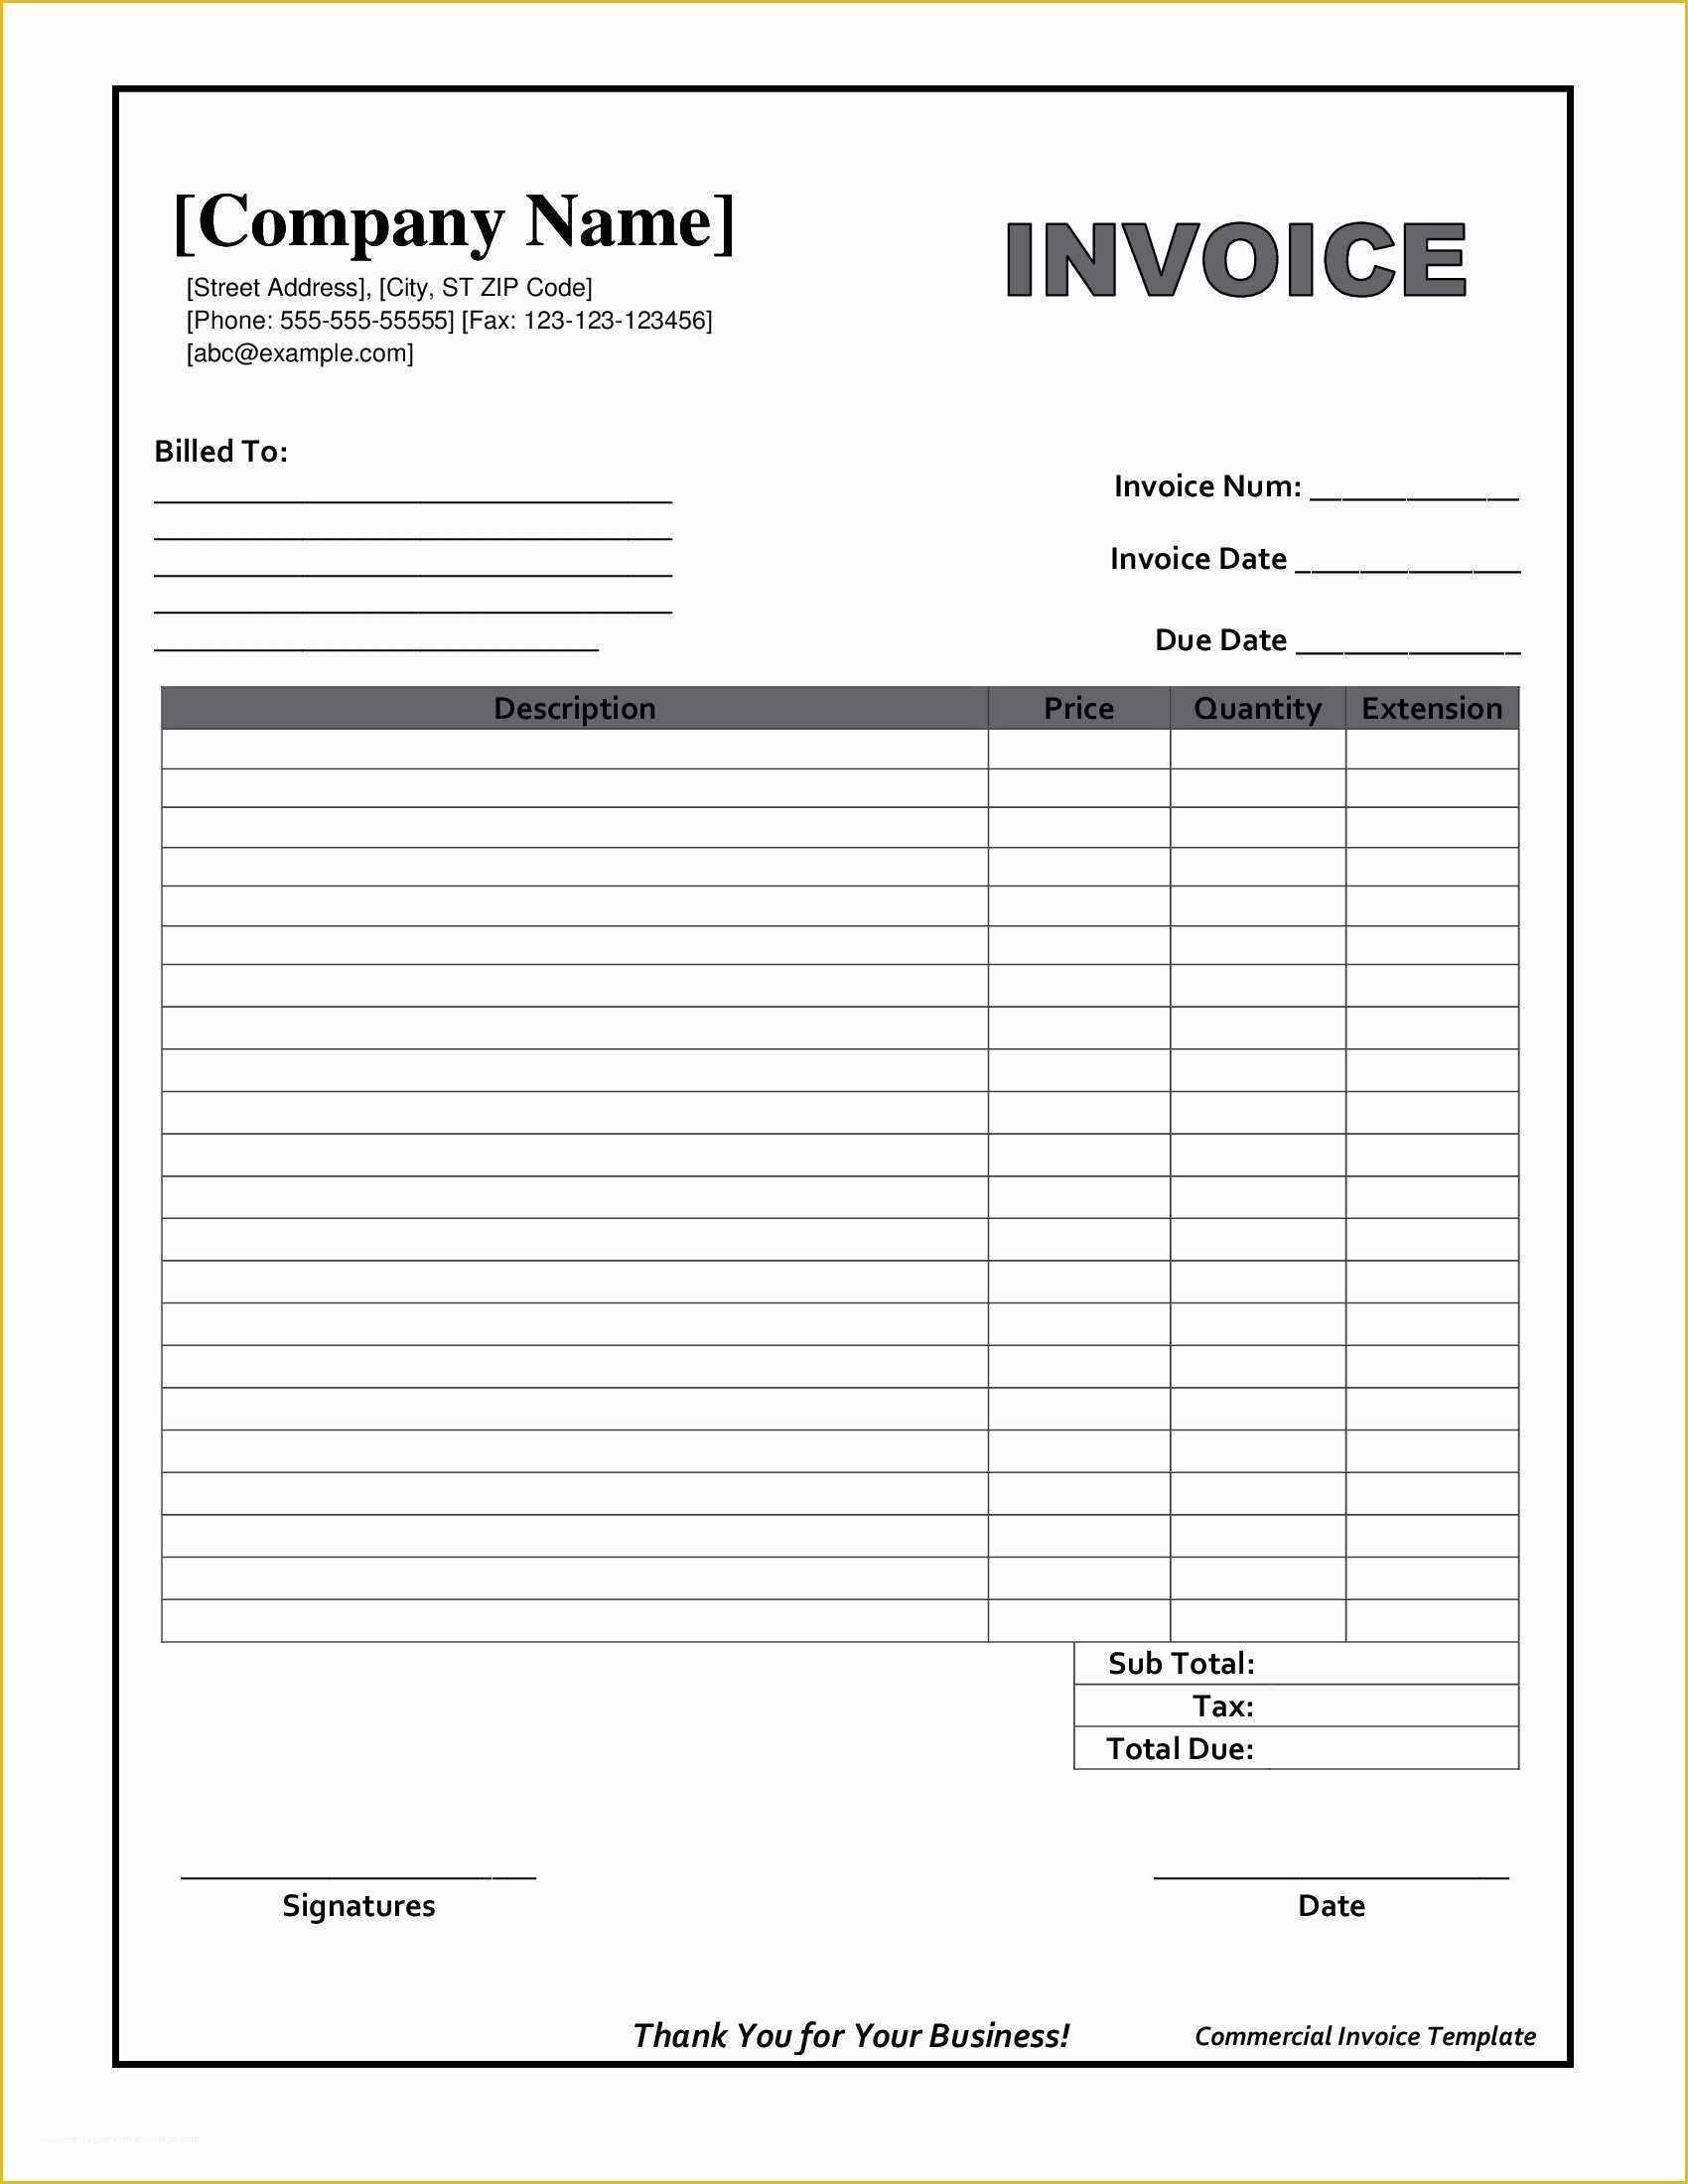 Html Invoice Template Free Download Of Blank Invoice form Free